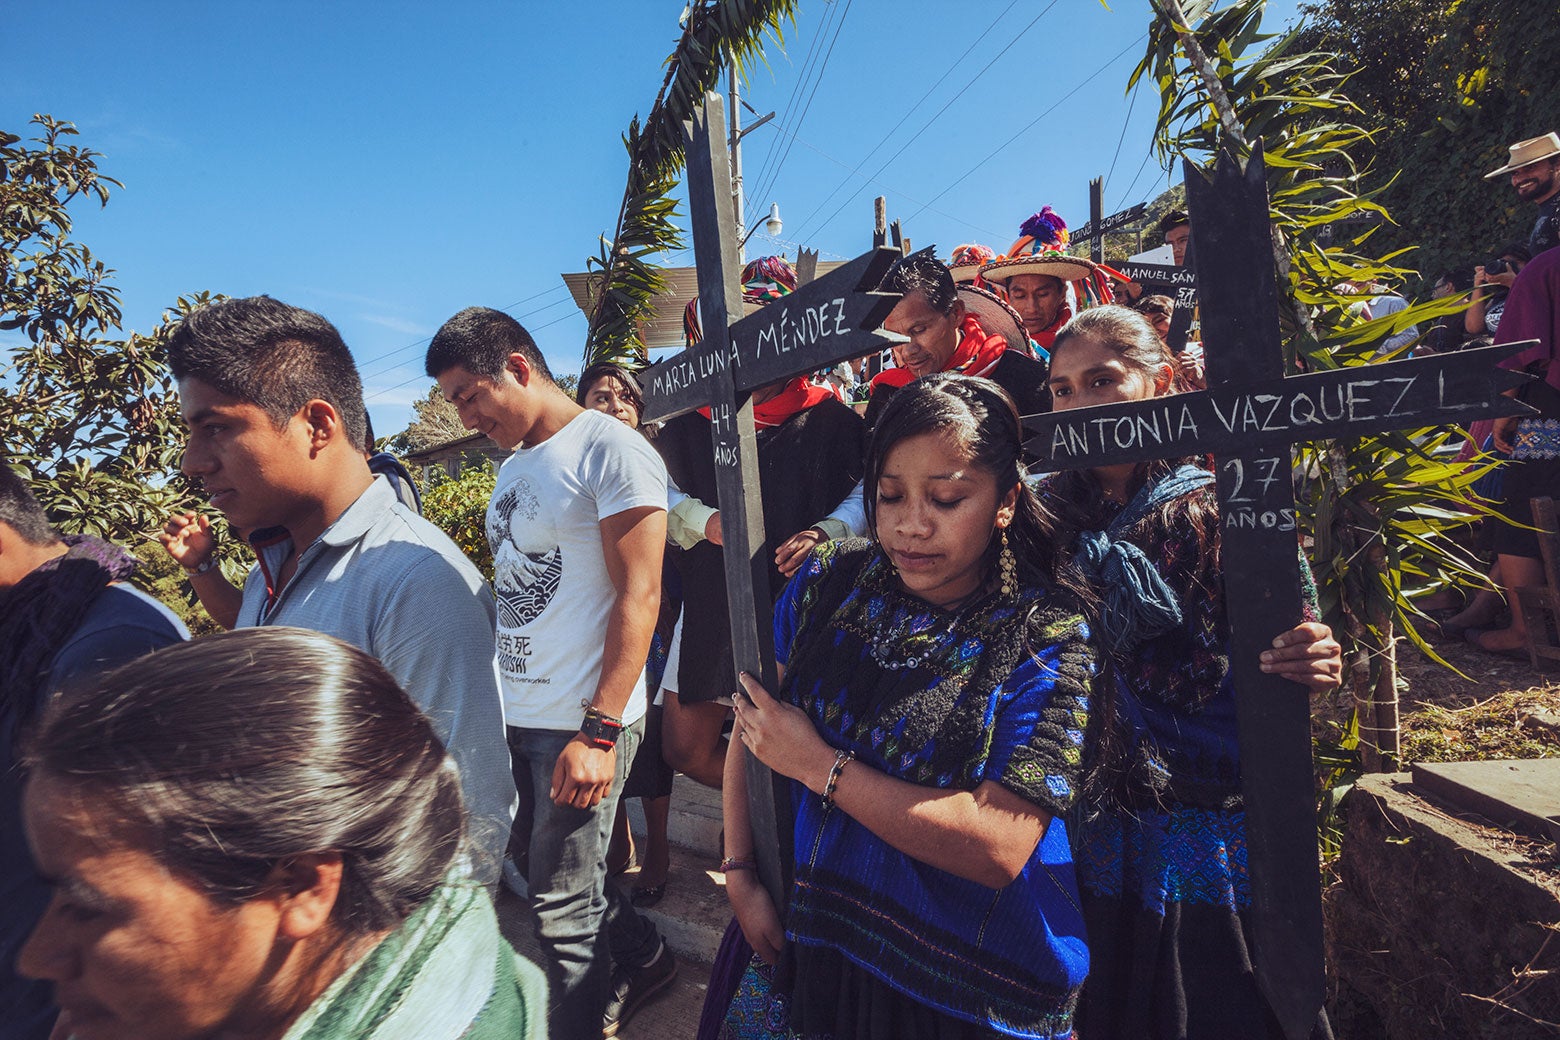 Survivors of the Acteal massacre and their descendants gathering to commemorate the dead, carrying crosses marked with their names and ages on the day they died.